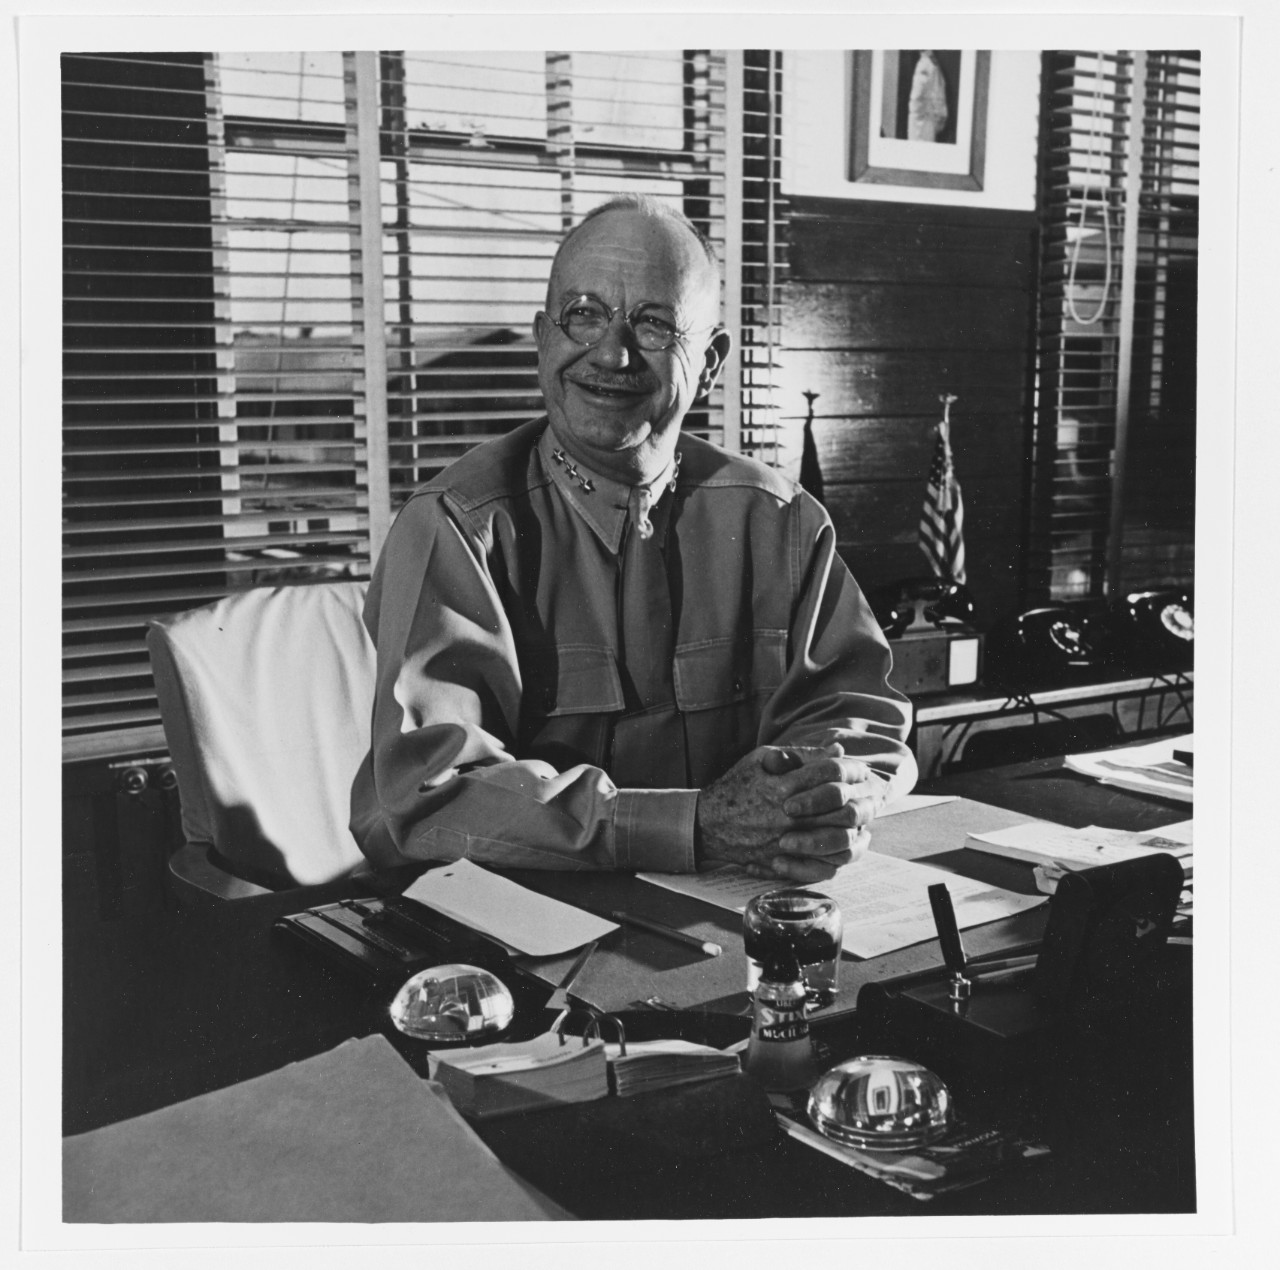 Lieutenant General Holland M. Smith, USMC Photographed in a genial mood at his desk, 30 April 1945. Site may be at the Pacific Fleet Advanced Headquarters on Guam. Official U.S. Navy Photograph, now in the collections of the National Archives.